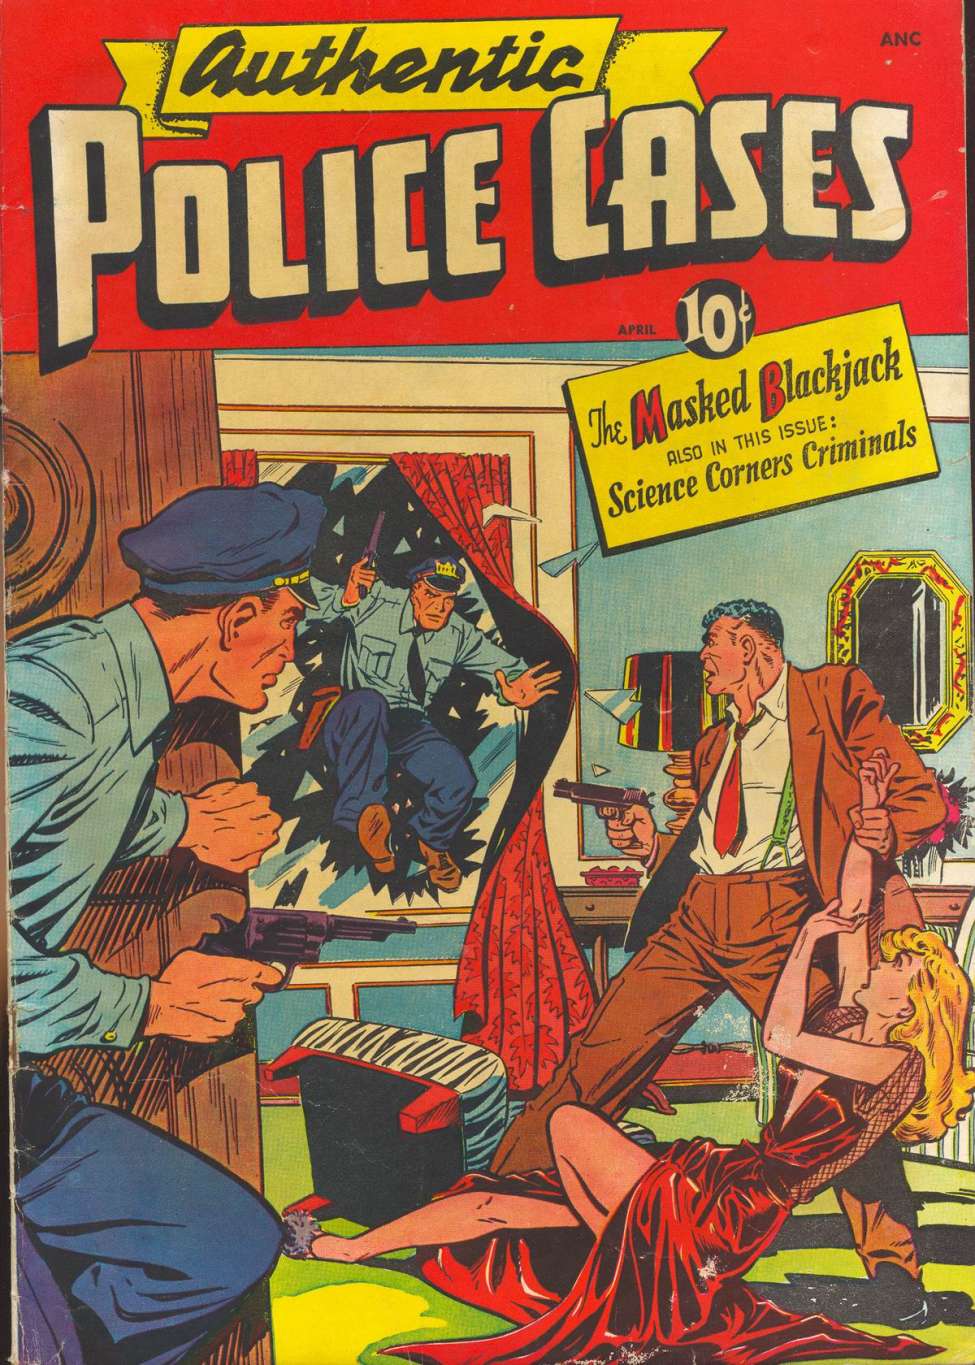 Book Cover For Authentic Police Cases 7